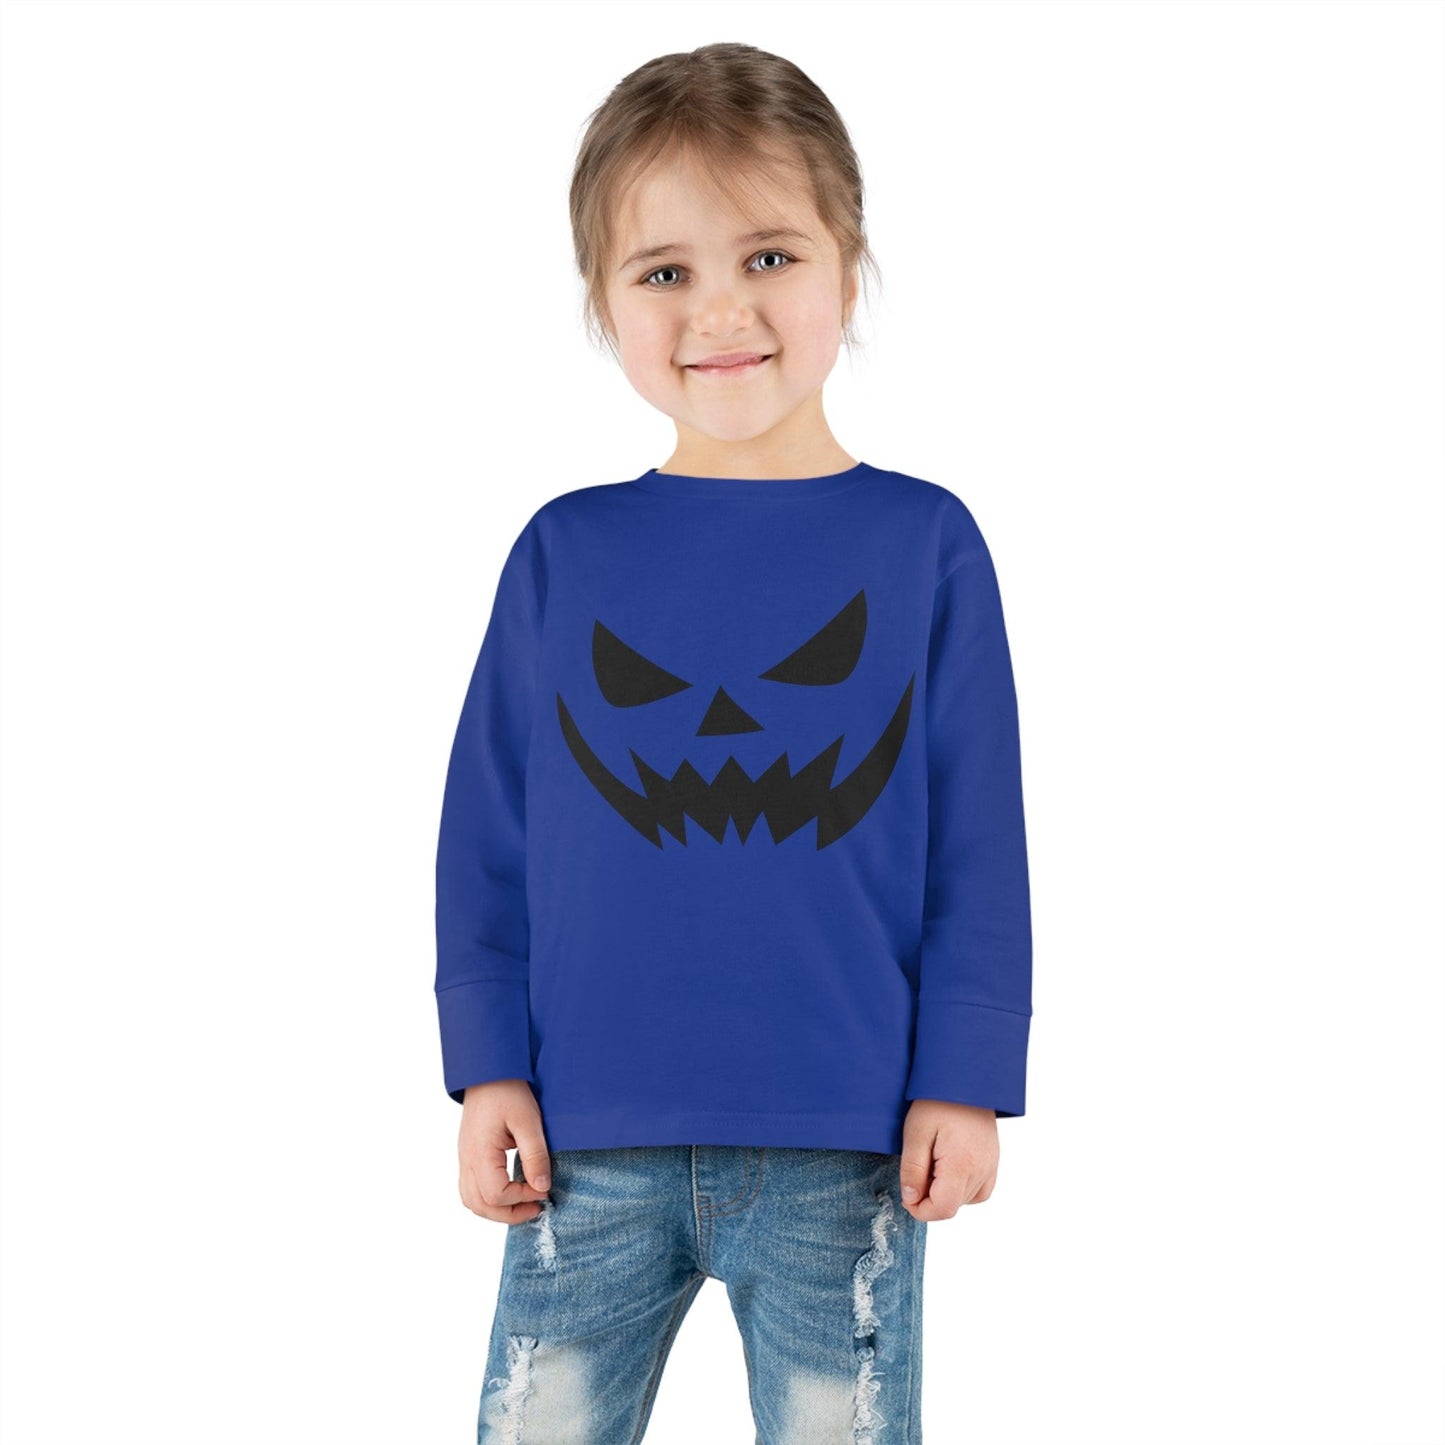 Kids Halloween Pumpkin Face Shirt Kids Jack O Lantern Shirt Kids Halloween Shirt Kids Long Sleeve Trick or Treat Outfit for Halloween - Giftsmojo